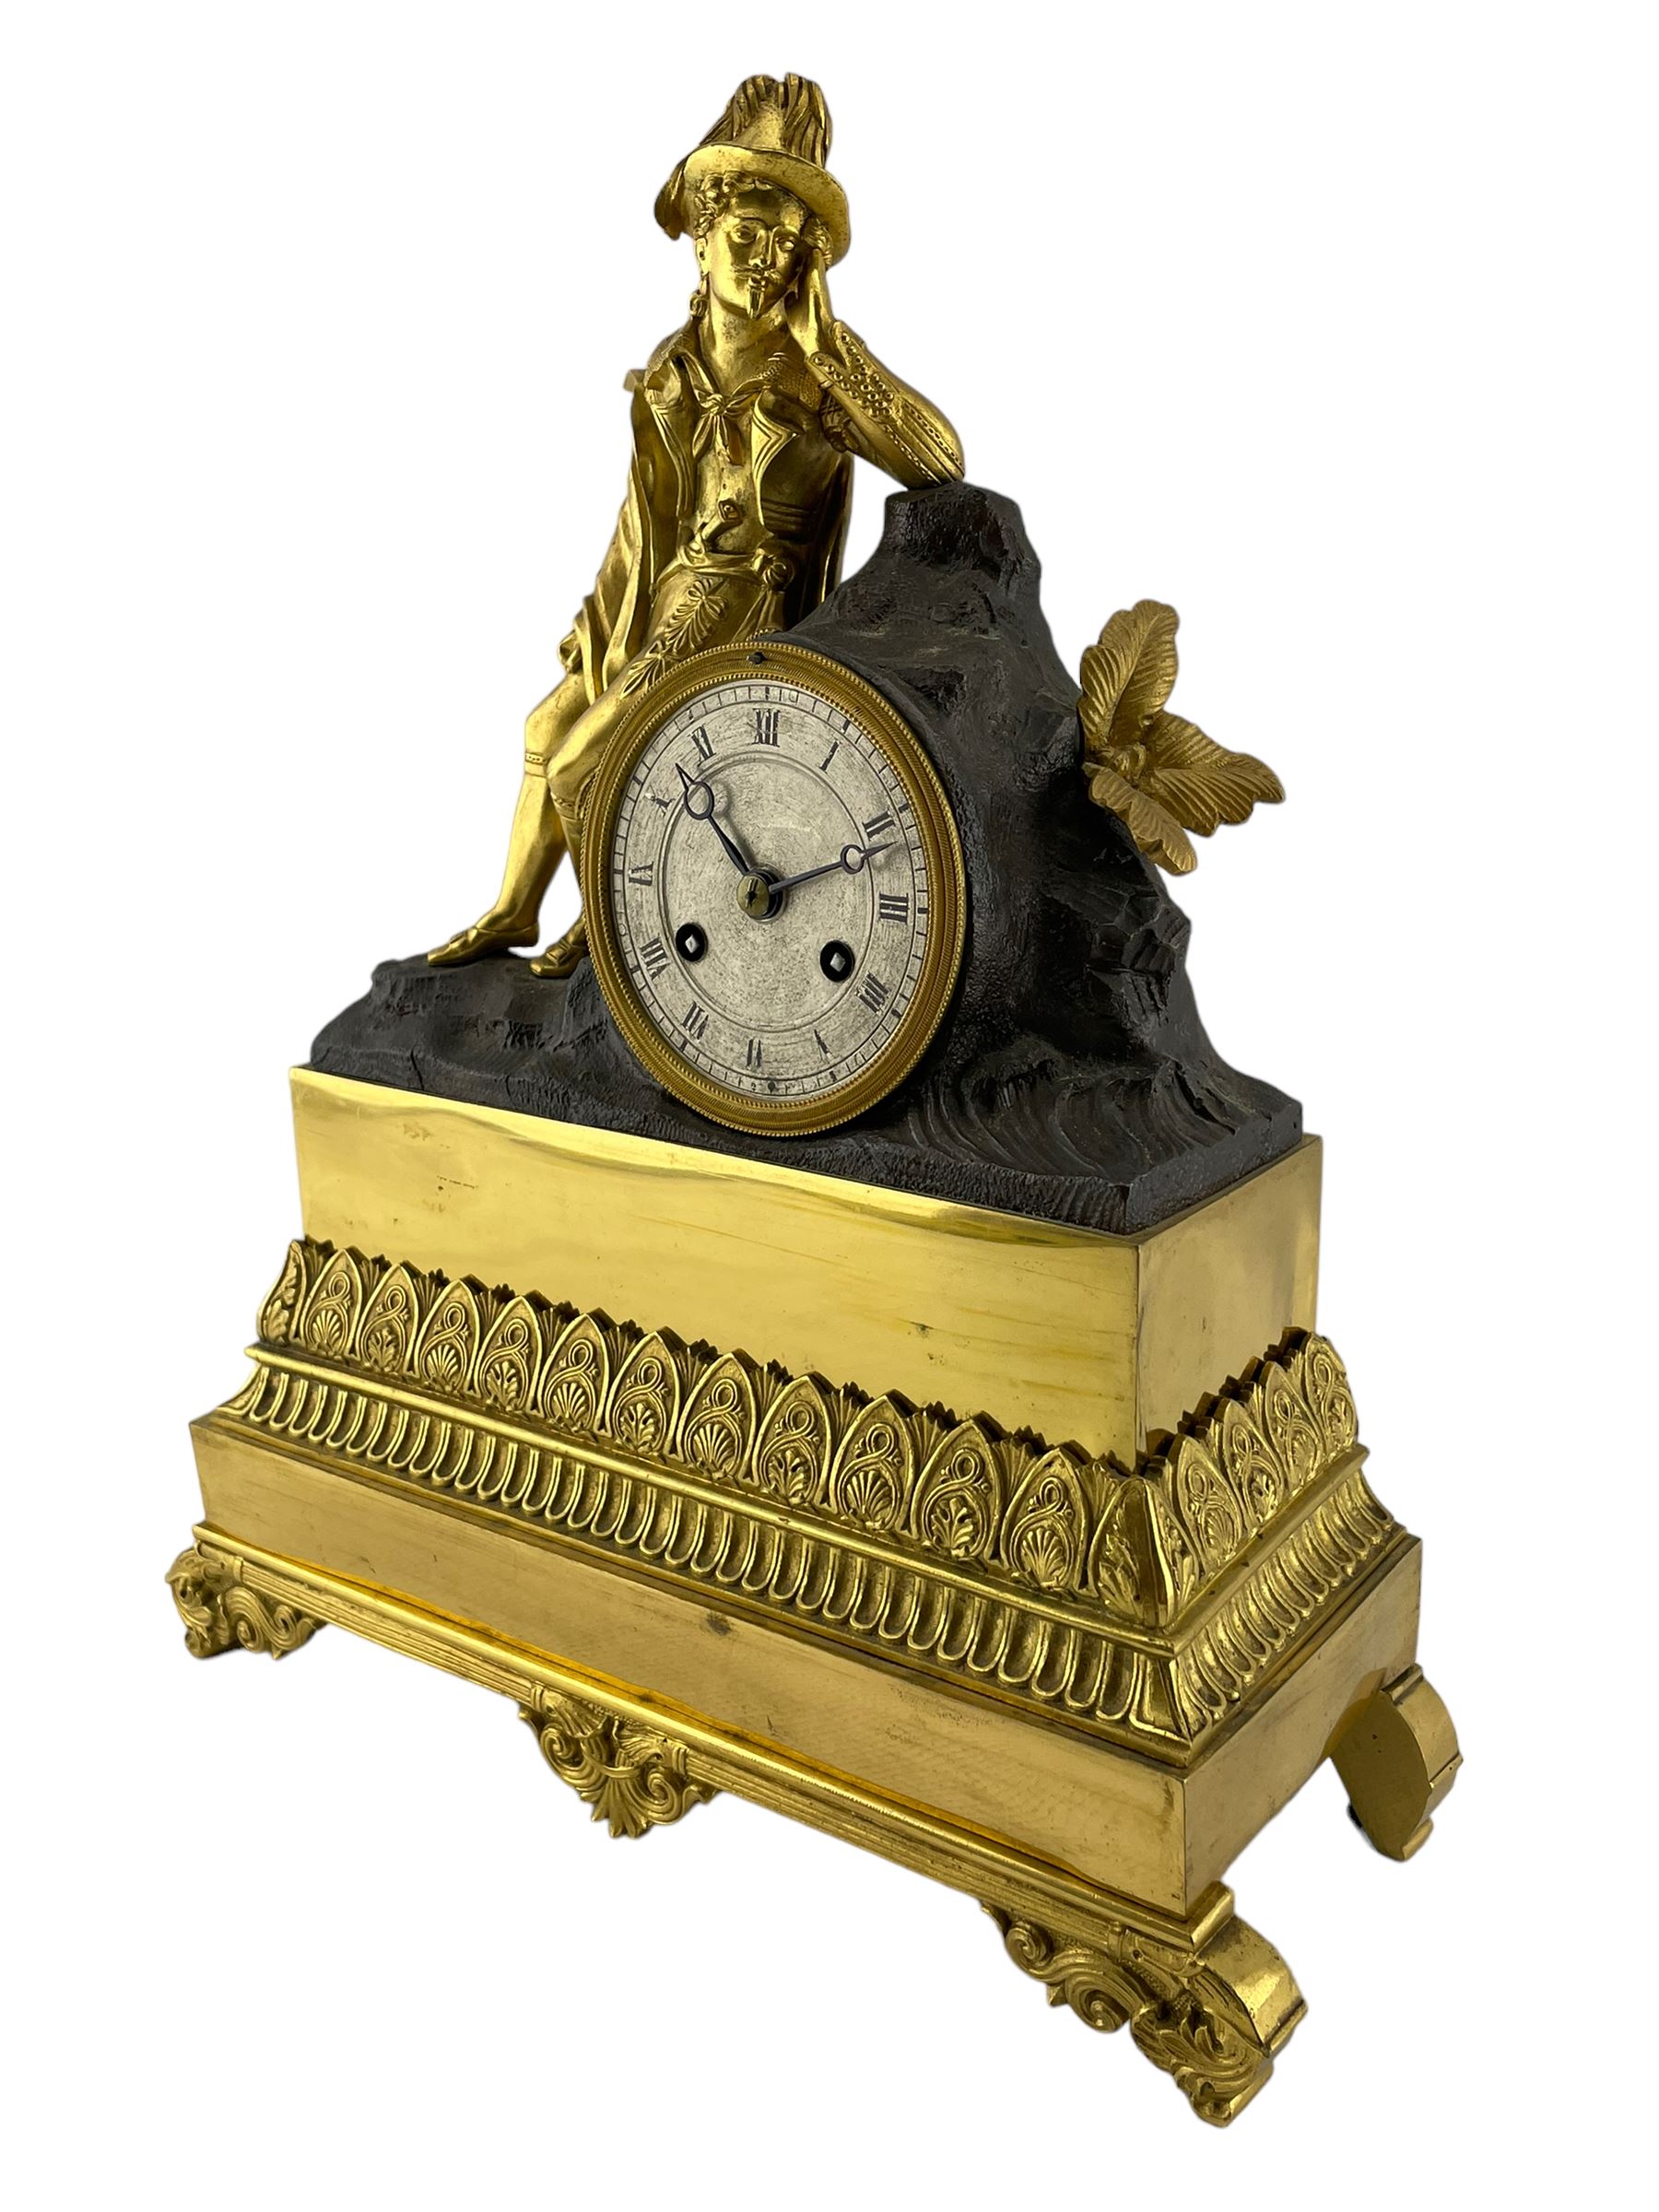 Louis Phillipe - 8-day French striking mantle clock circa 1840 - Image 4 of 11